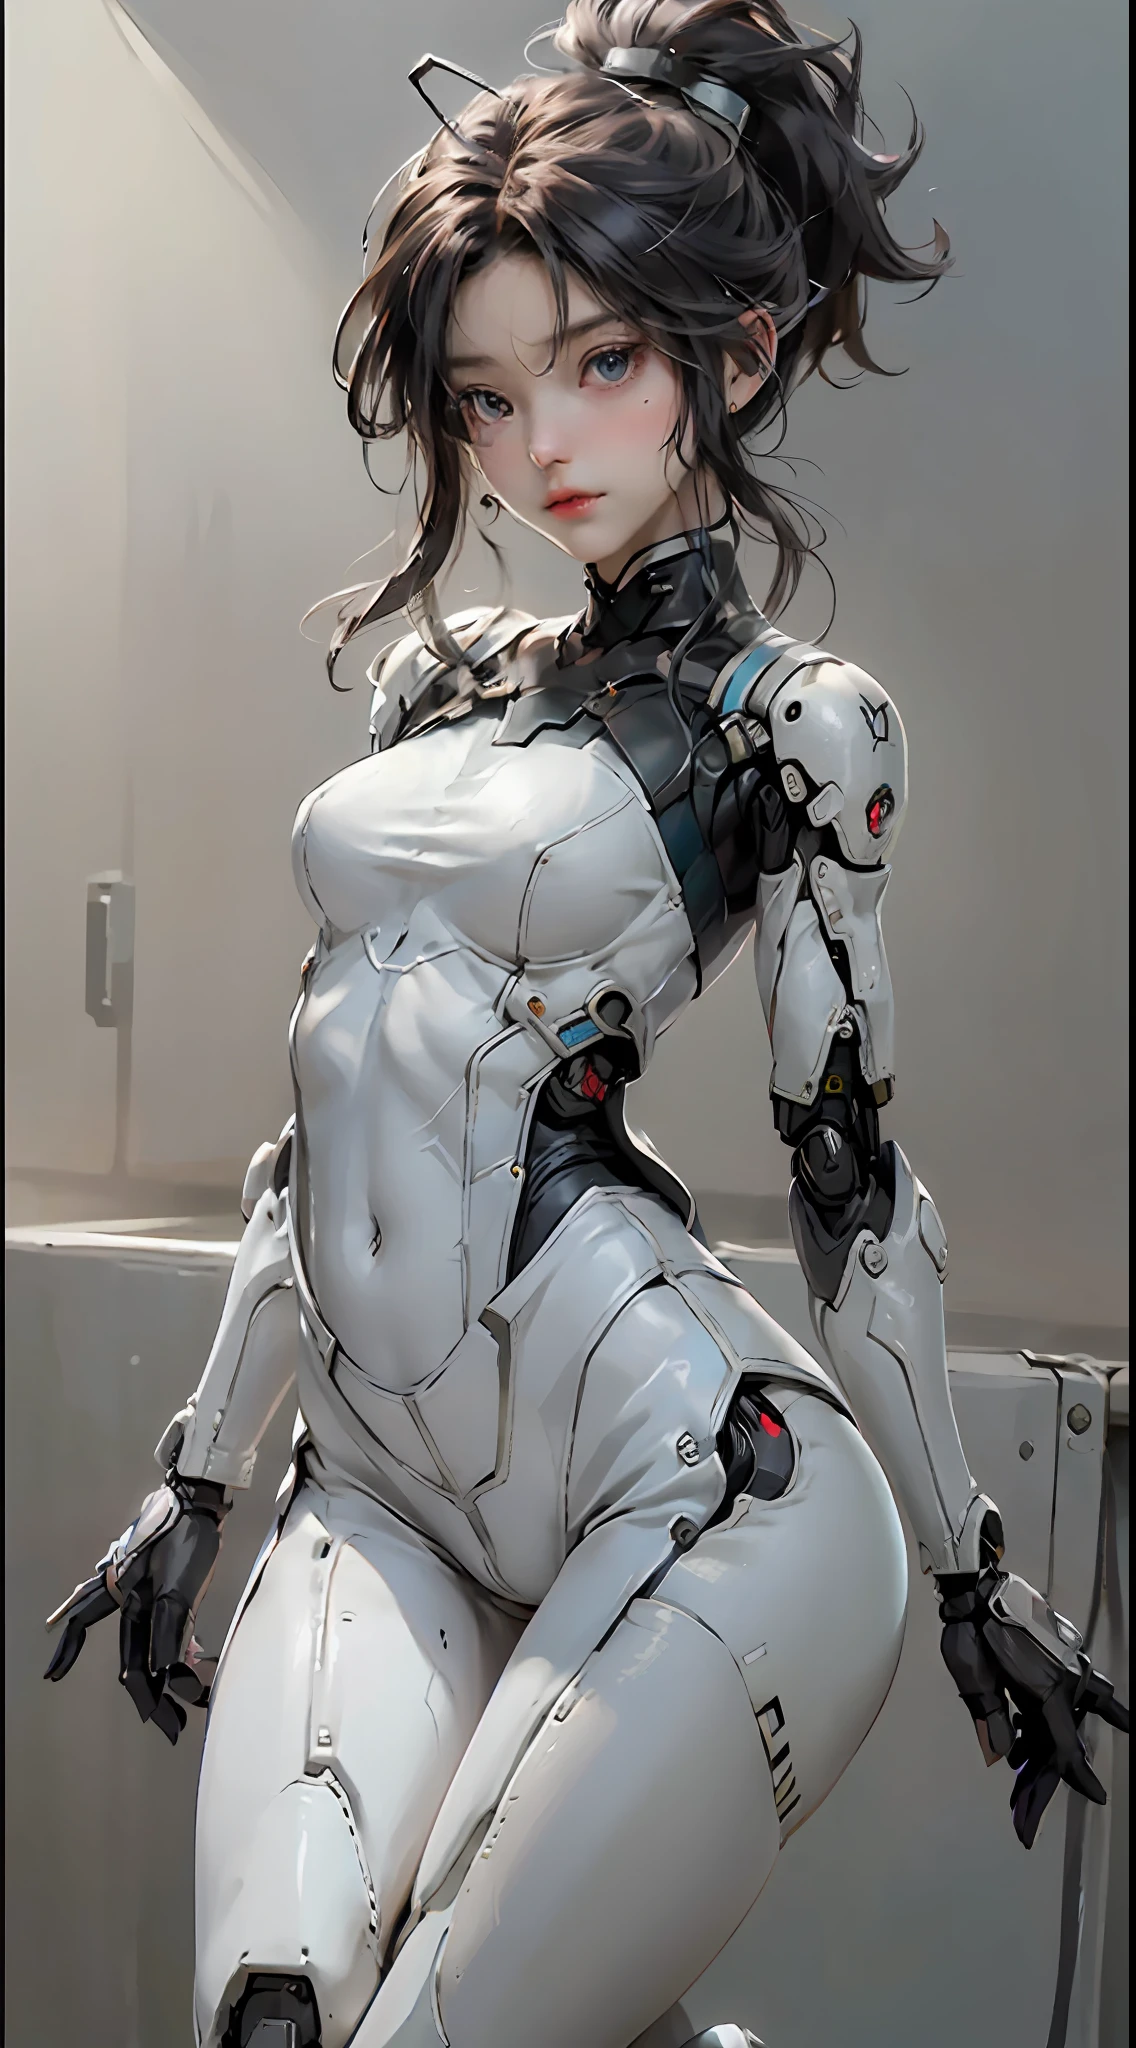 Extremely cute human eighteen year old girl face, human torso, human huge , human abdomen, human hips, robotic arms, mechanical leg, arms and legs with hard white shiny shell and black joints, very beautiful and feminine, Short, , tiny, tiny, busty buttocks, medium bust, cleavage display, flat belly display, partial helmet with antenna on the ear, black robot joints, very stylish, award-winning product design, black rubber tights, The shiny white metal breastplate opens at the cleavage and abdomen, the white metal buttocks are wrinkled, and the armor has stylish, glowing trims